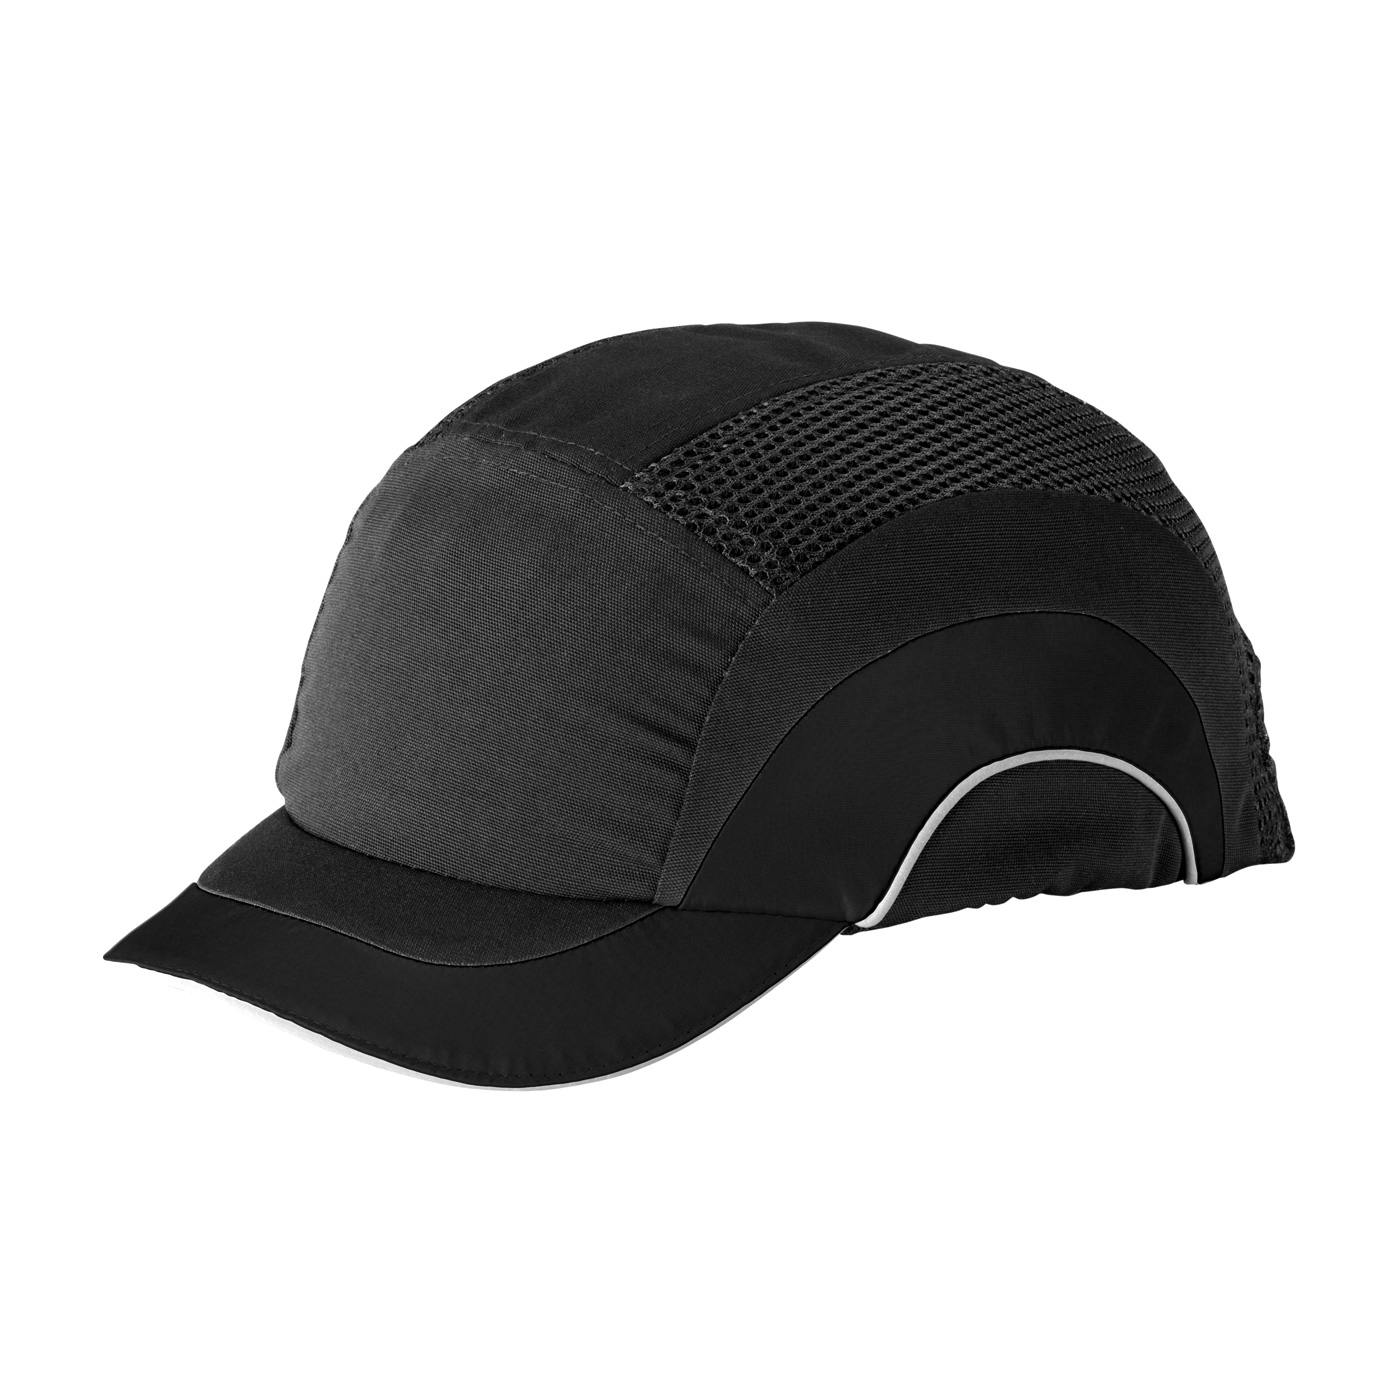 HardCap A1+™ Baseball Style Bump Cap with HDPE Protective Liner and Adjustable Back - Short Brim (282-ABS150)_0